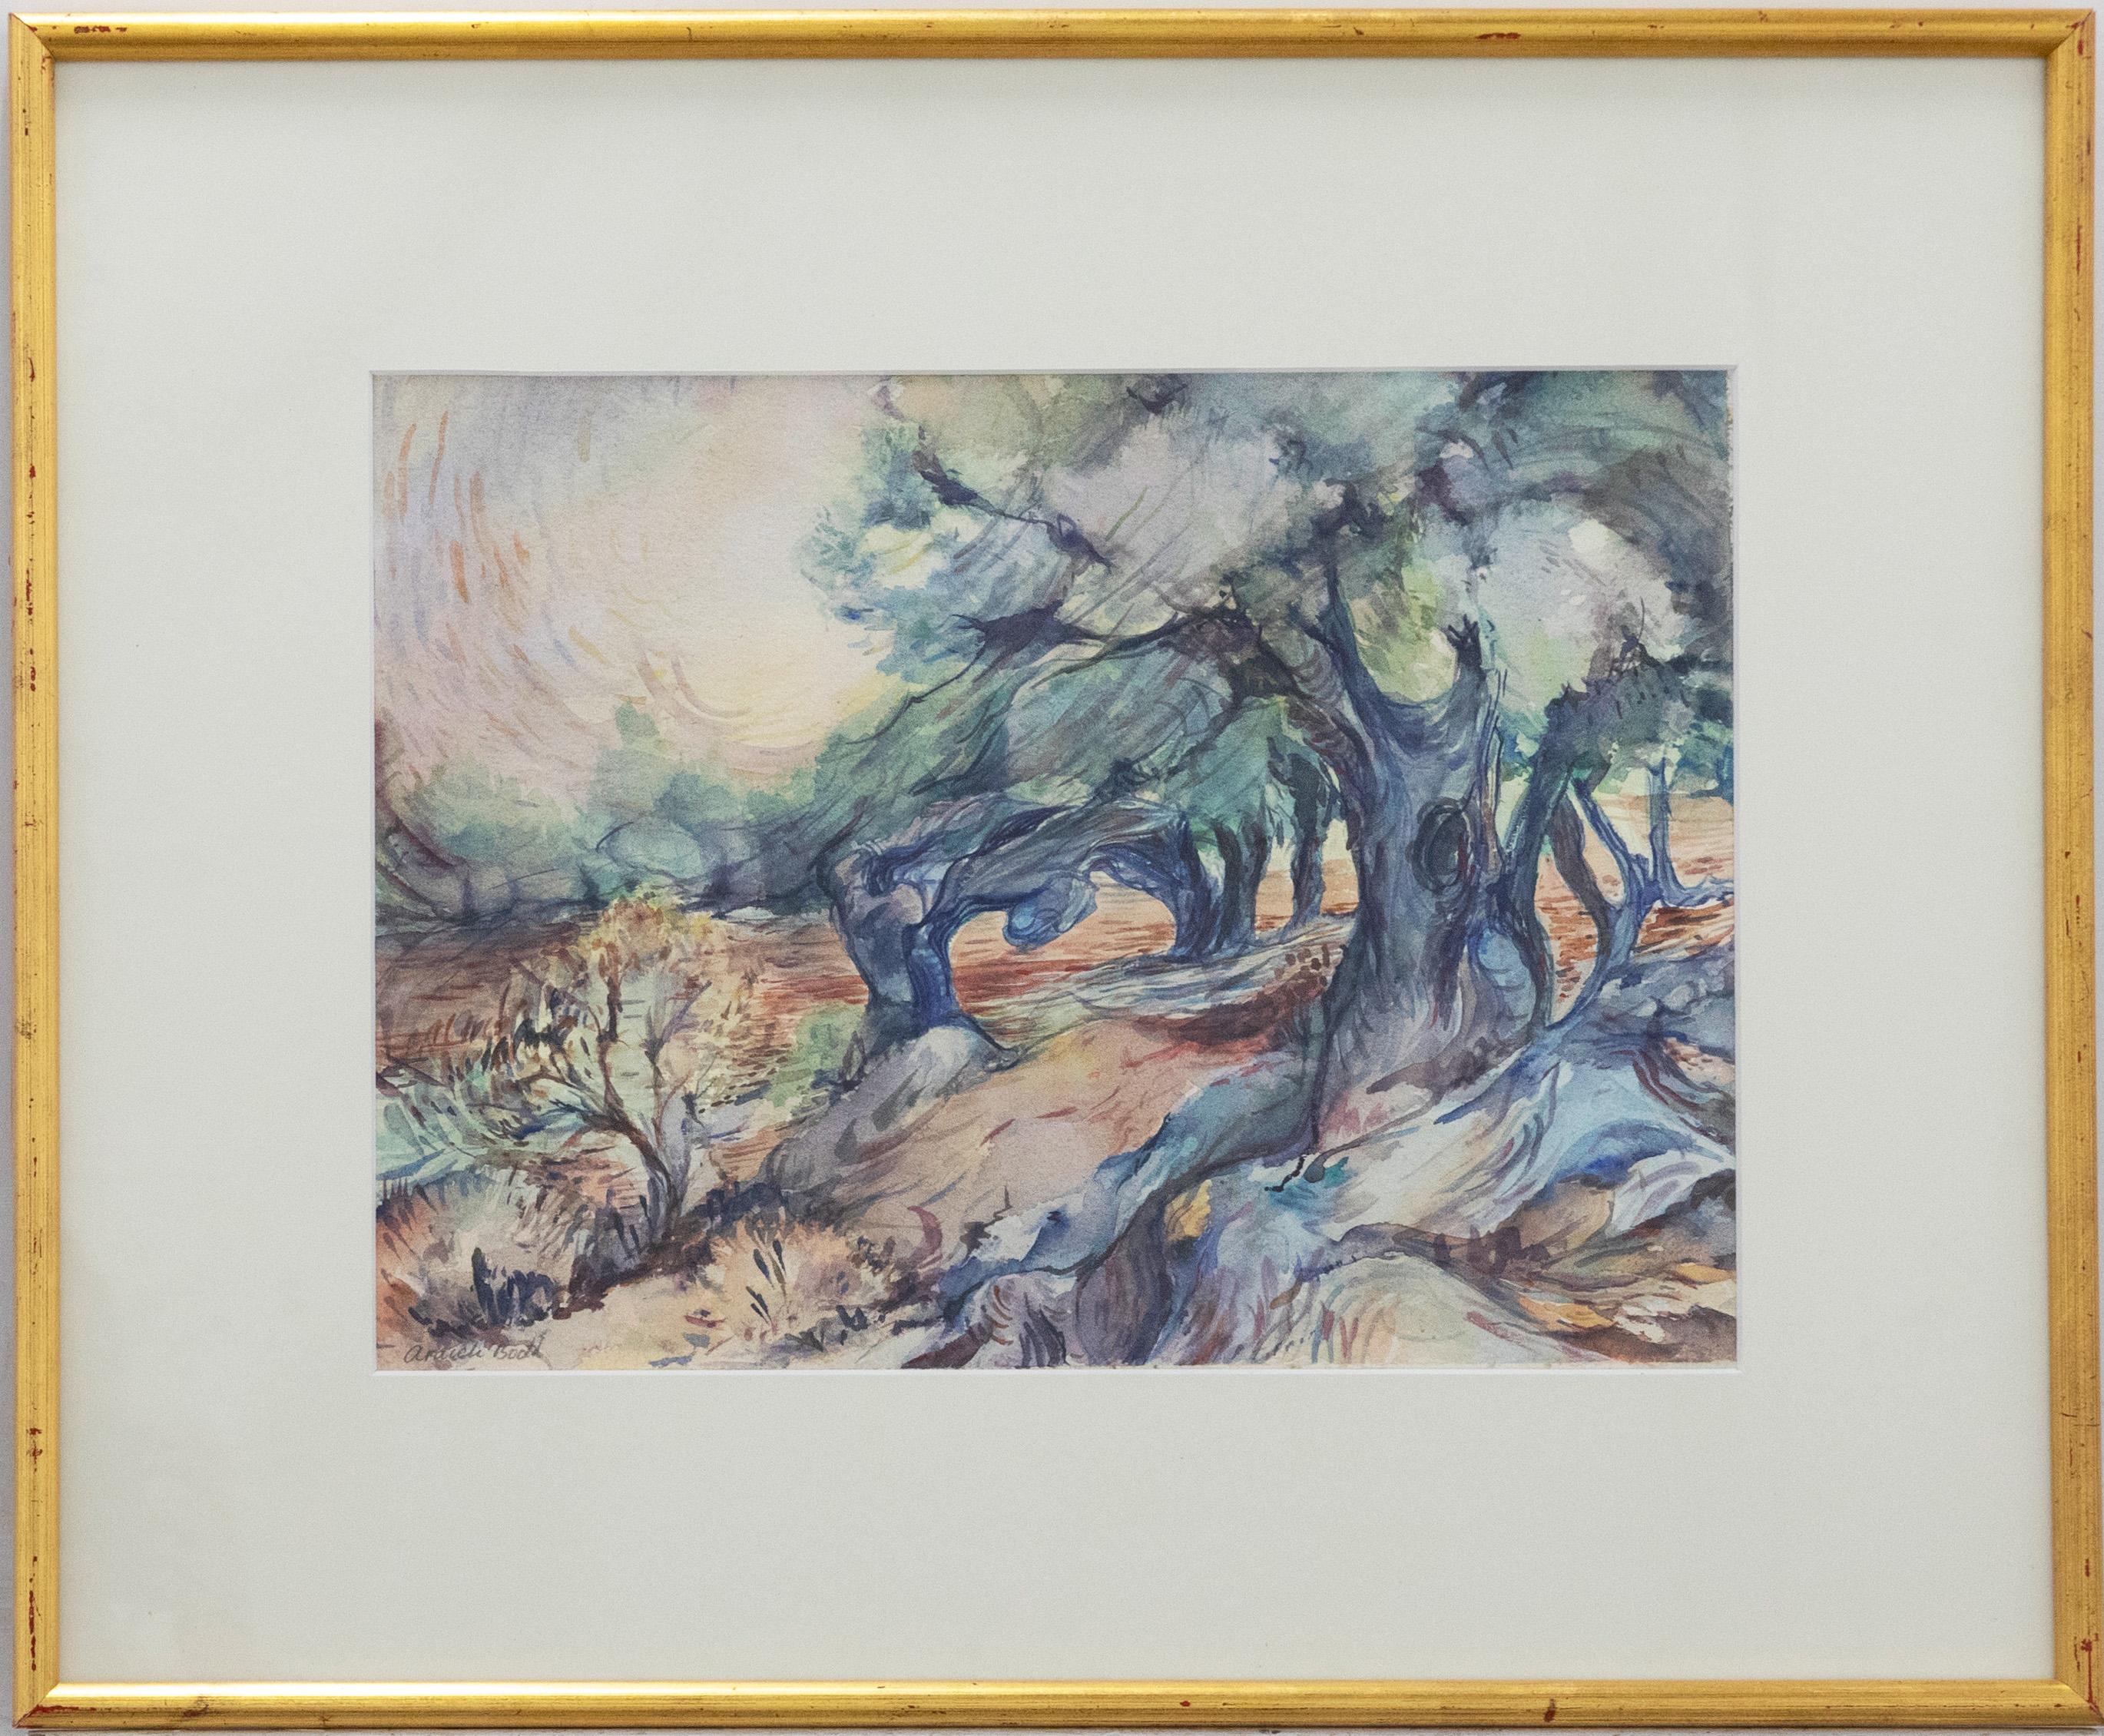 This captivating watercolour depicts a blinding riverscape with rays of sunlight beaming through a small grove of trees. The watercolour has been signed by the artist to the lower left. Well-presented in a crisp white mount and rolled edge frame. On